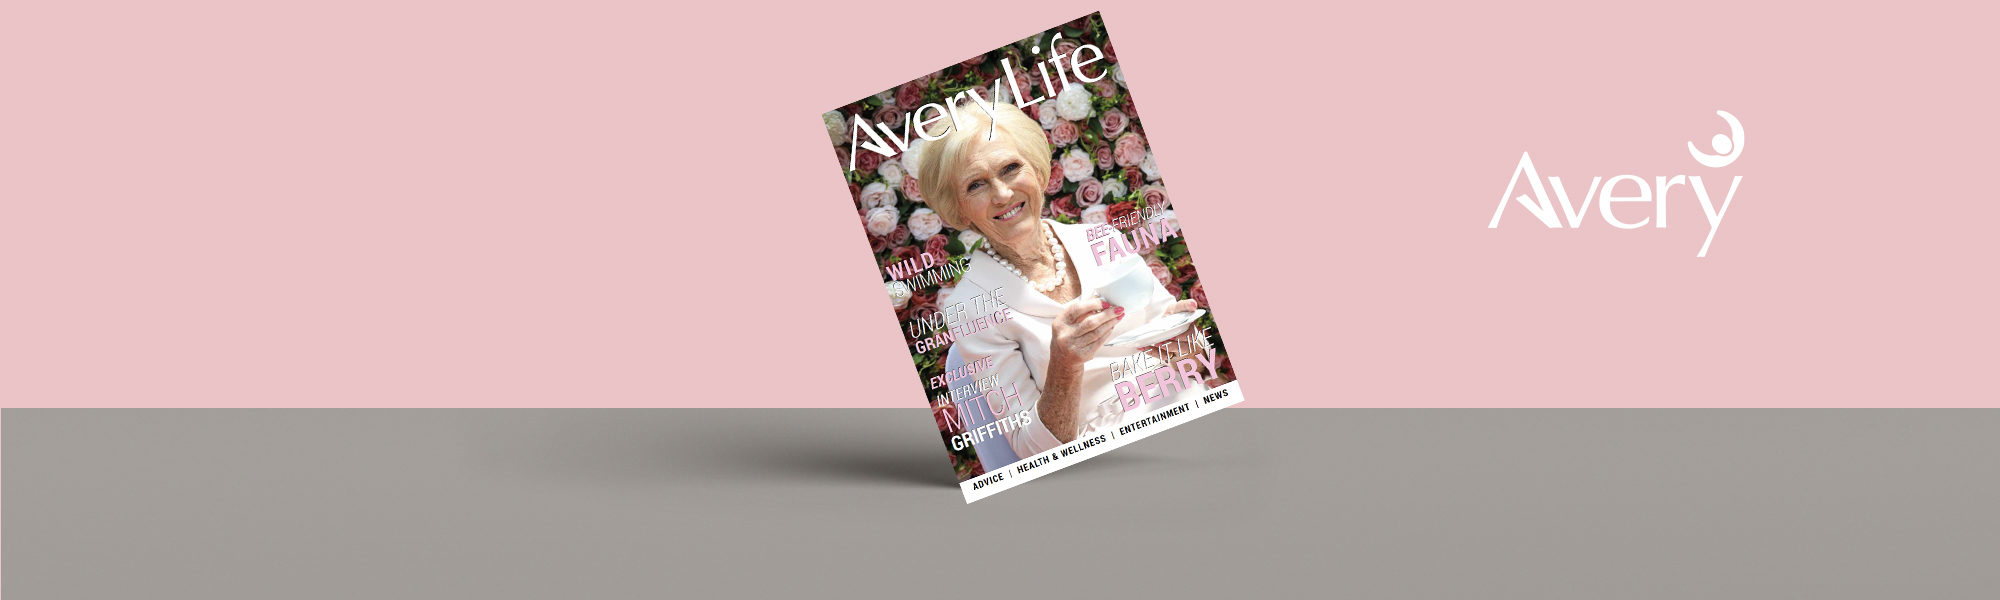 Avery Life Issue 6